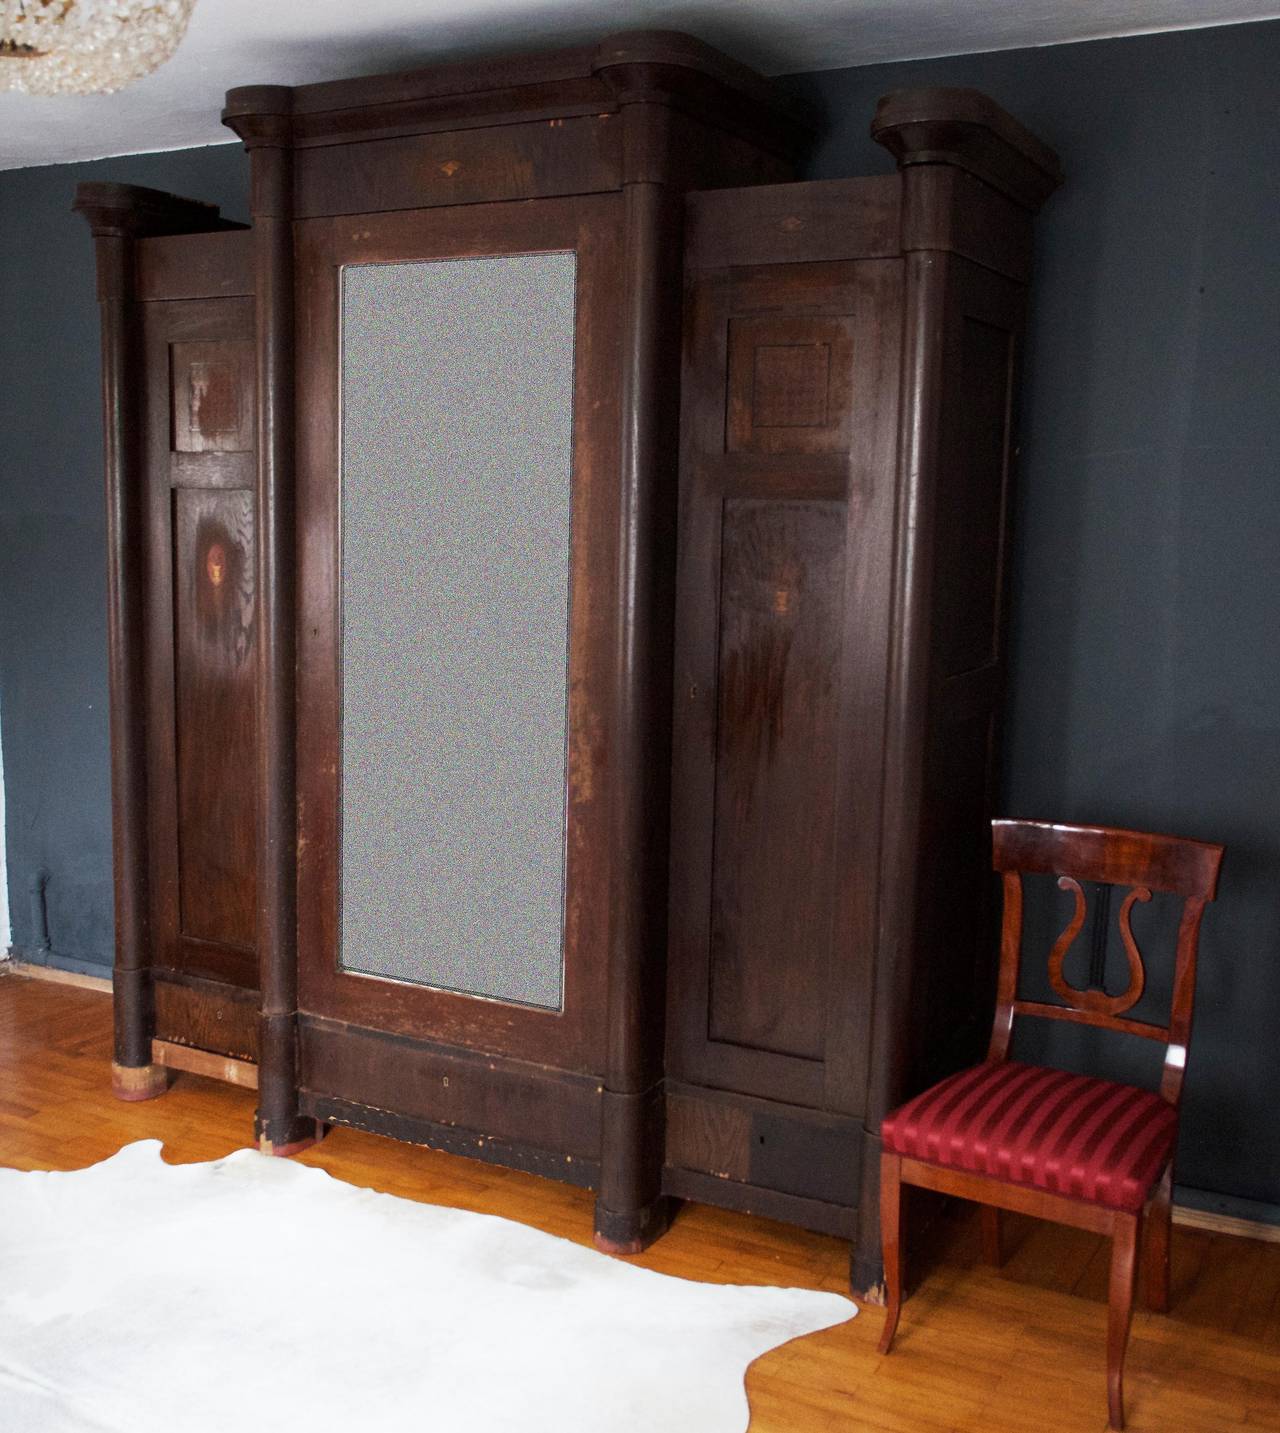 Vienna secession wardrobe still unrestored with small inlays made from different kind of veneer.
This wardrobe consist of 3 parts (doors) on the middle door is a large mirror with facet cut (50x156cm) below the doors are three drawers. 
the frame